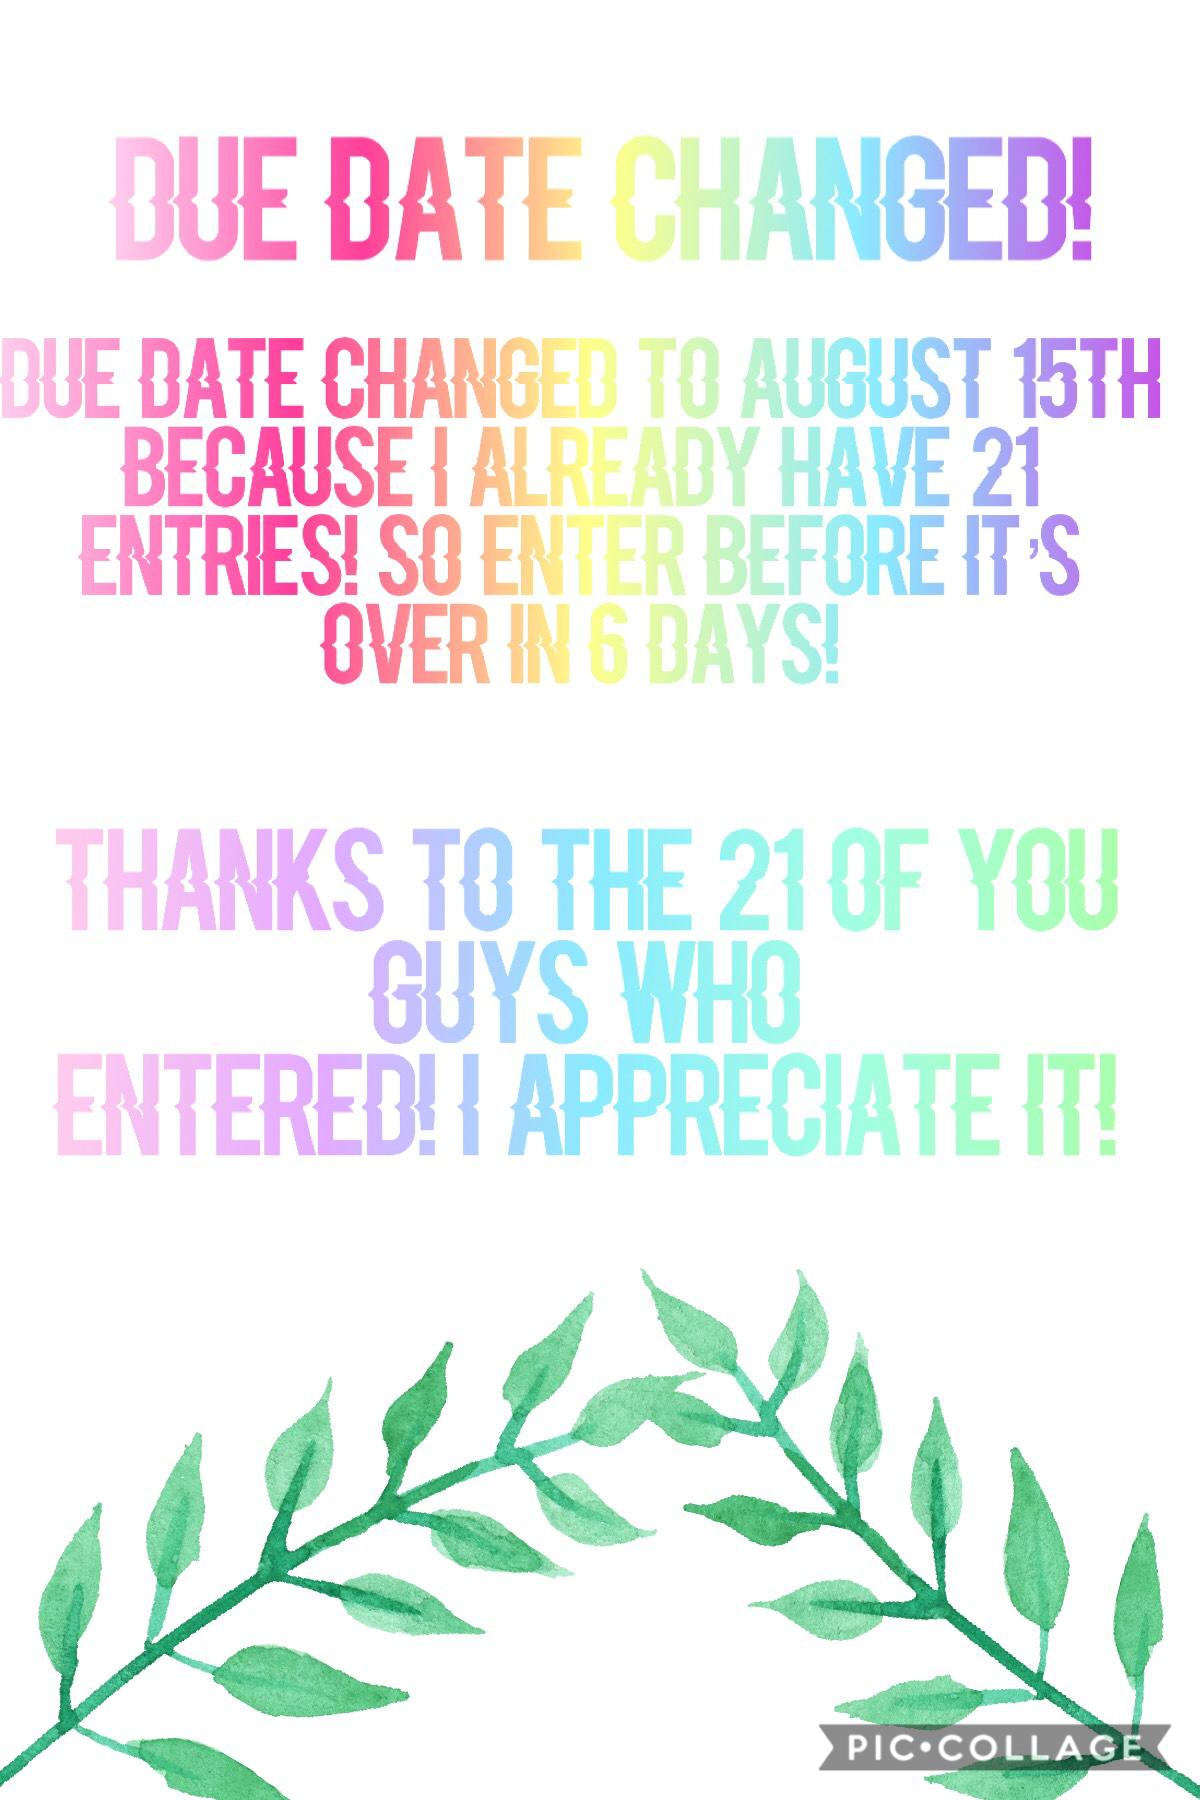 Tap
Due date for the contest changed to August 15 cuz I already have a LOT of entires! 💕 xox
Btw I GOT A FANPAGE it’s so exciting! Tysm to whoever did that! It’s so kind of u